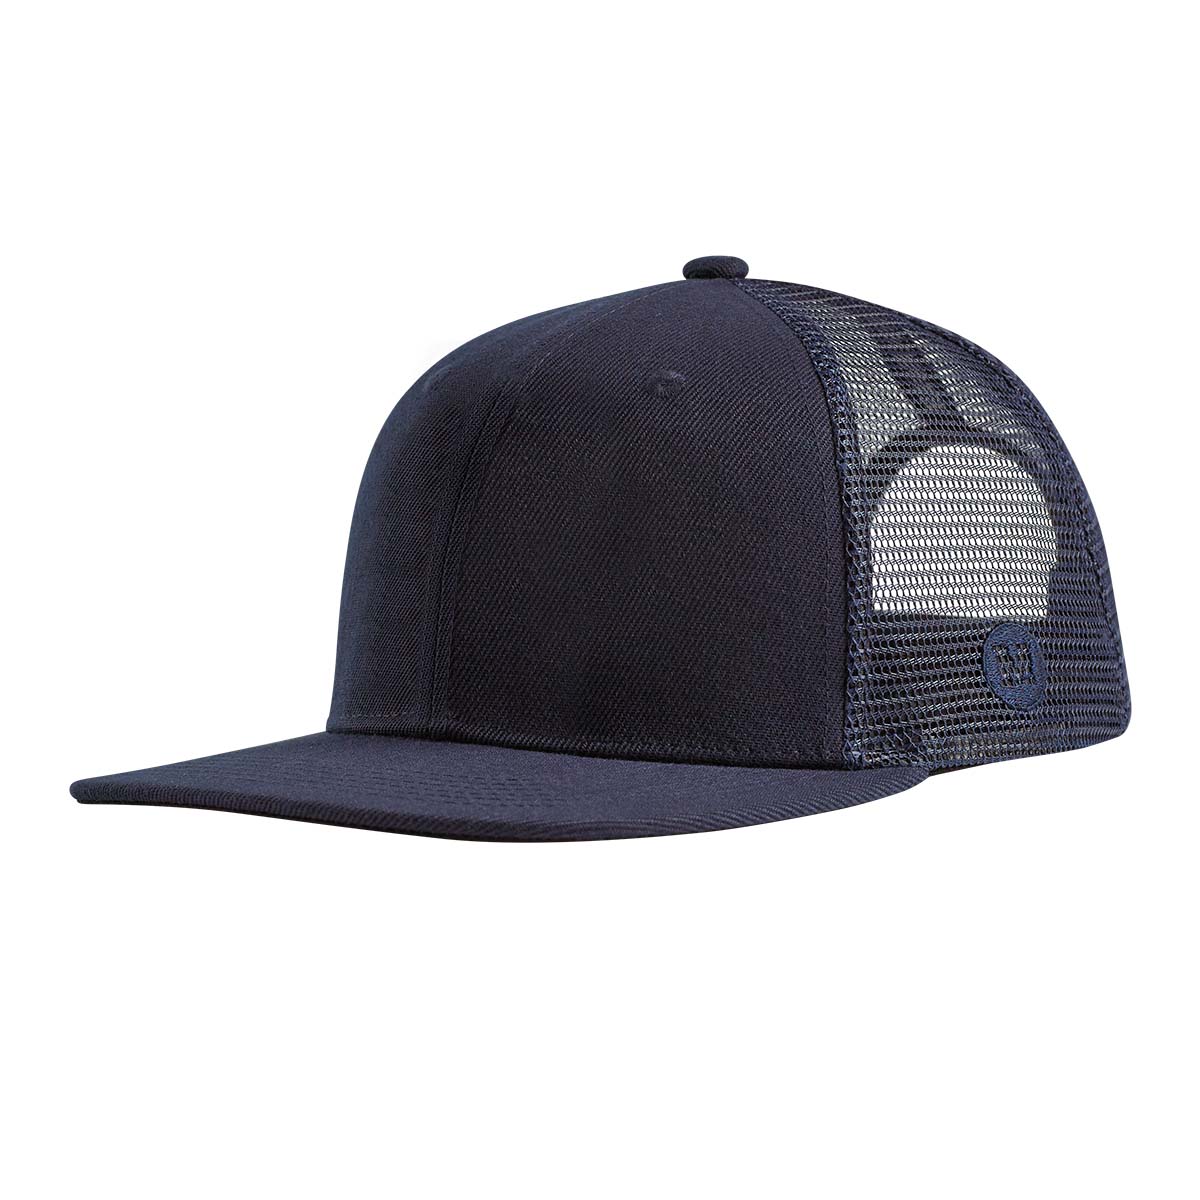 Premium Hats and Accessories - Elevate Your Style Tagged 